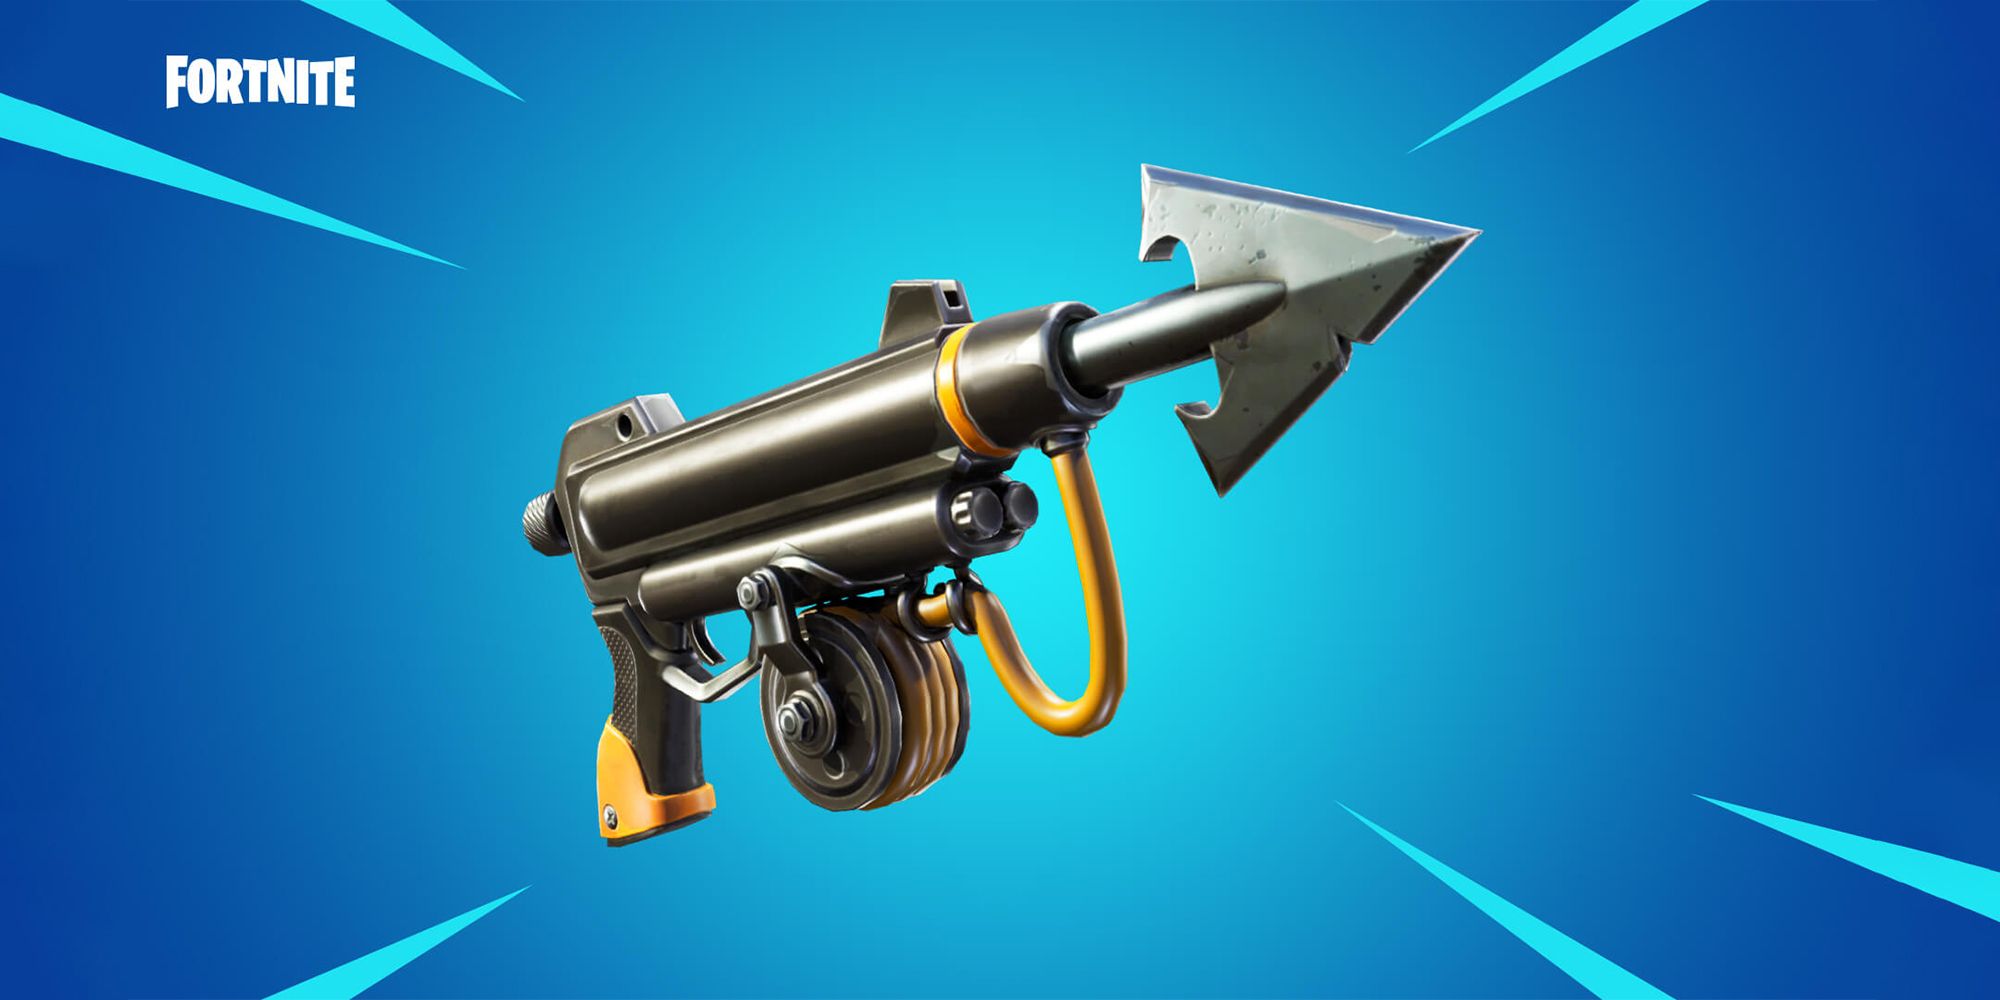 Rare Harpoon Gun from Fortnite before a blue backdrop. Fortnite logo is included in the top left corner of the image.